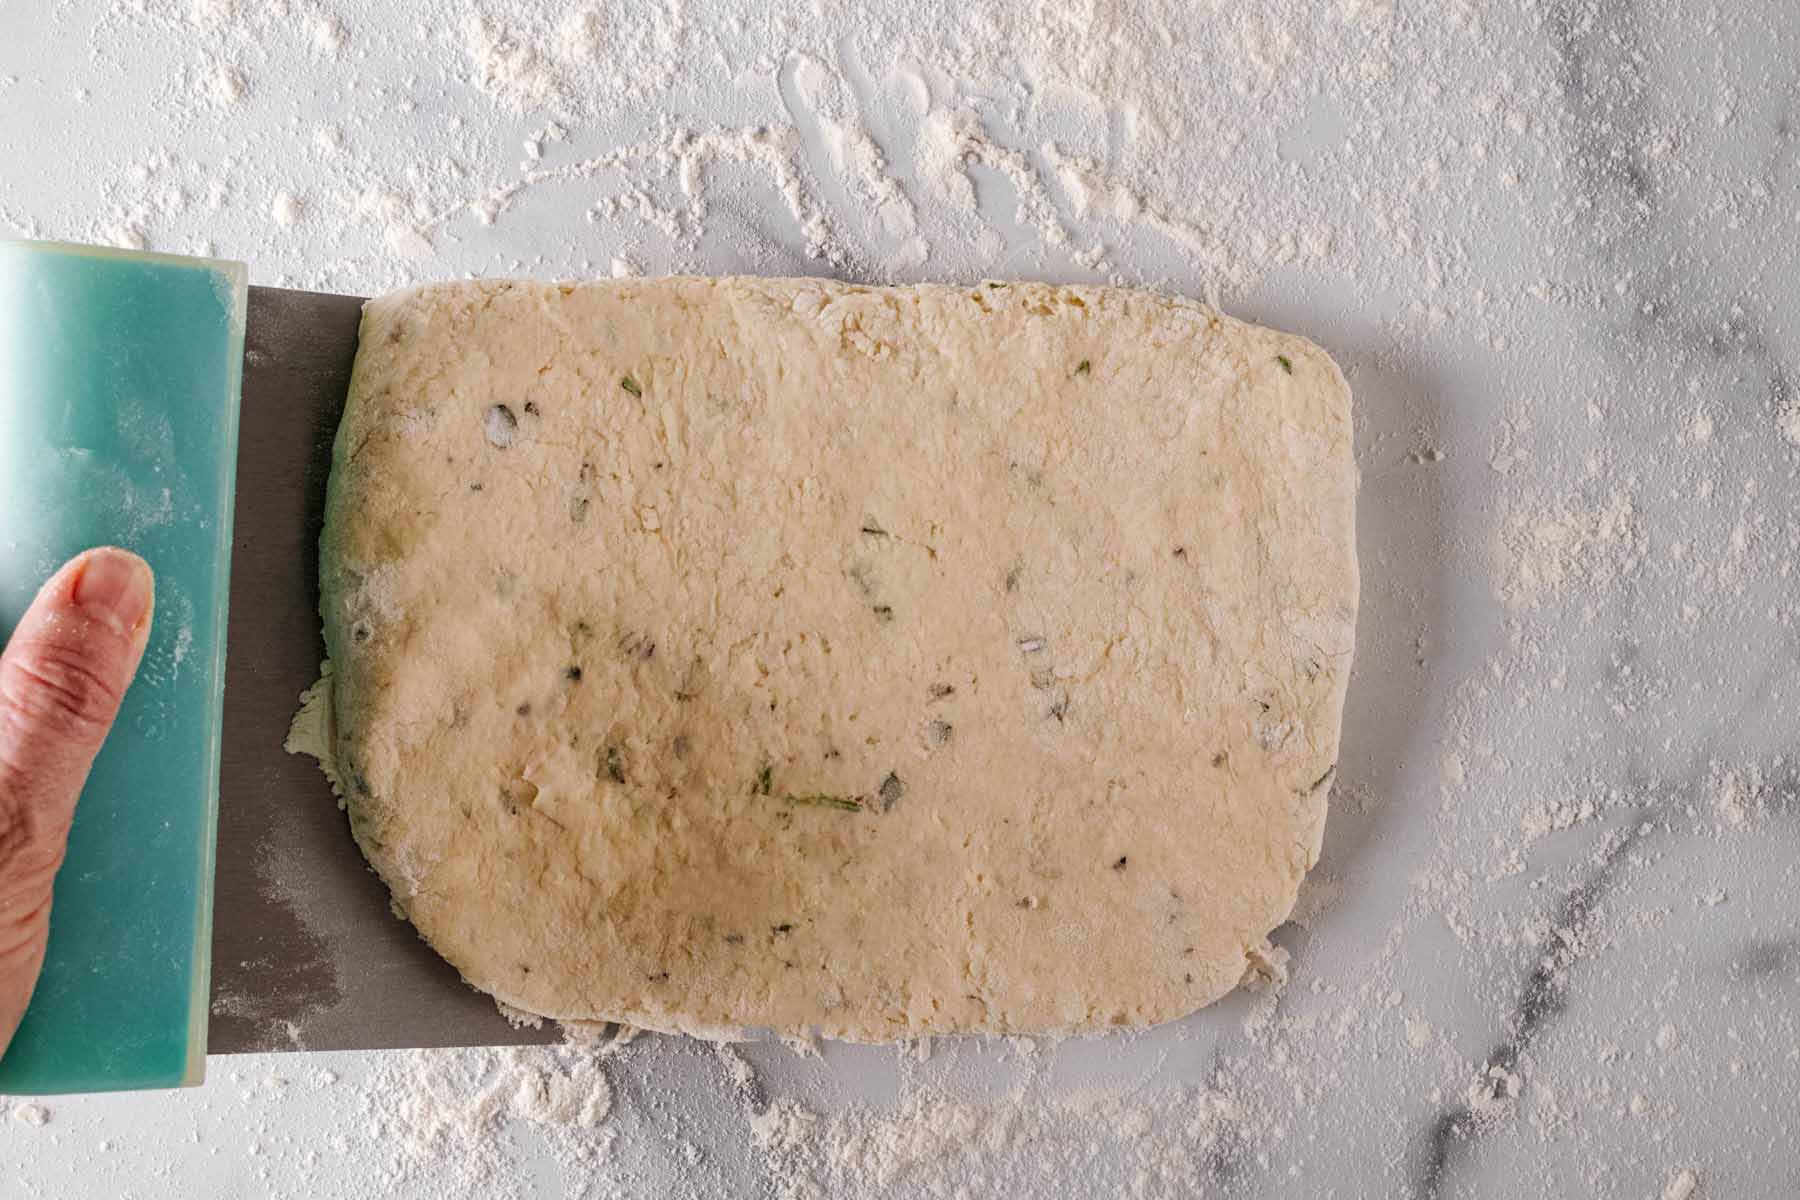 Biscuit dough being picked up on one side with a bench/dough scraper.